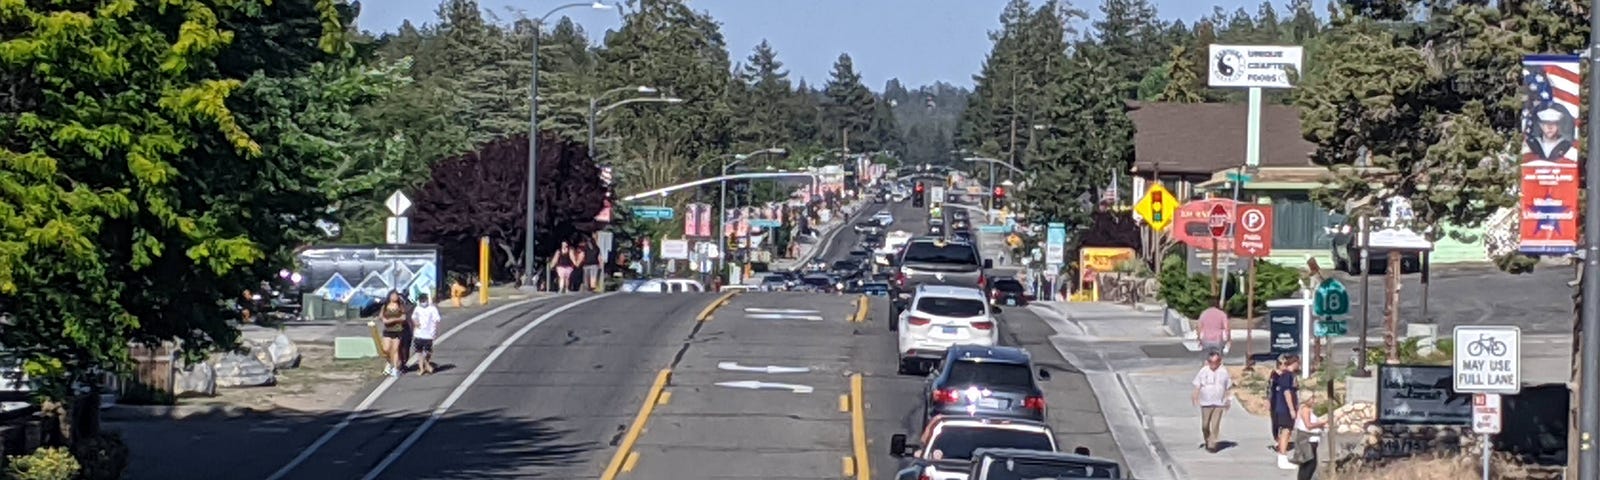 View of cars driving through mountain town.